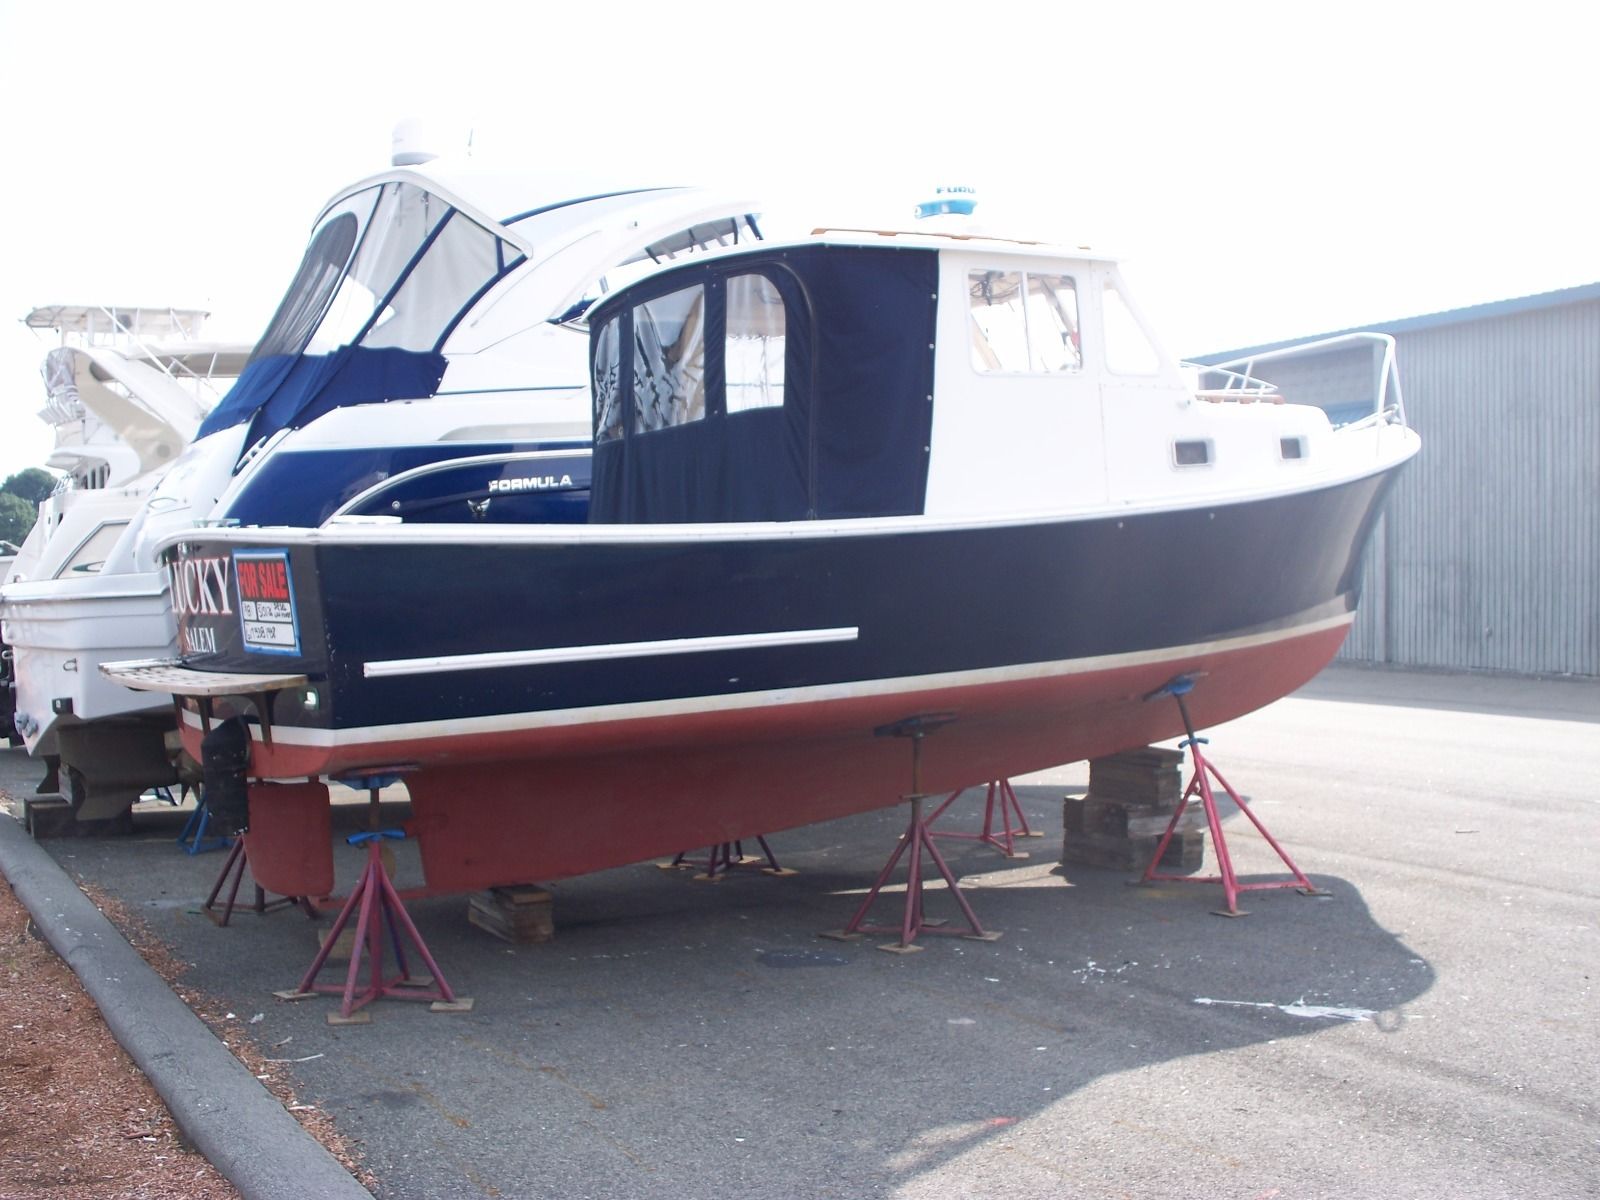 Sisu Lobster Boat 1981 for sale for $23,500 - Boats-from ...